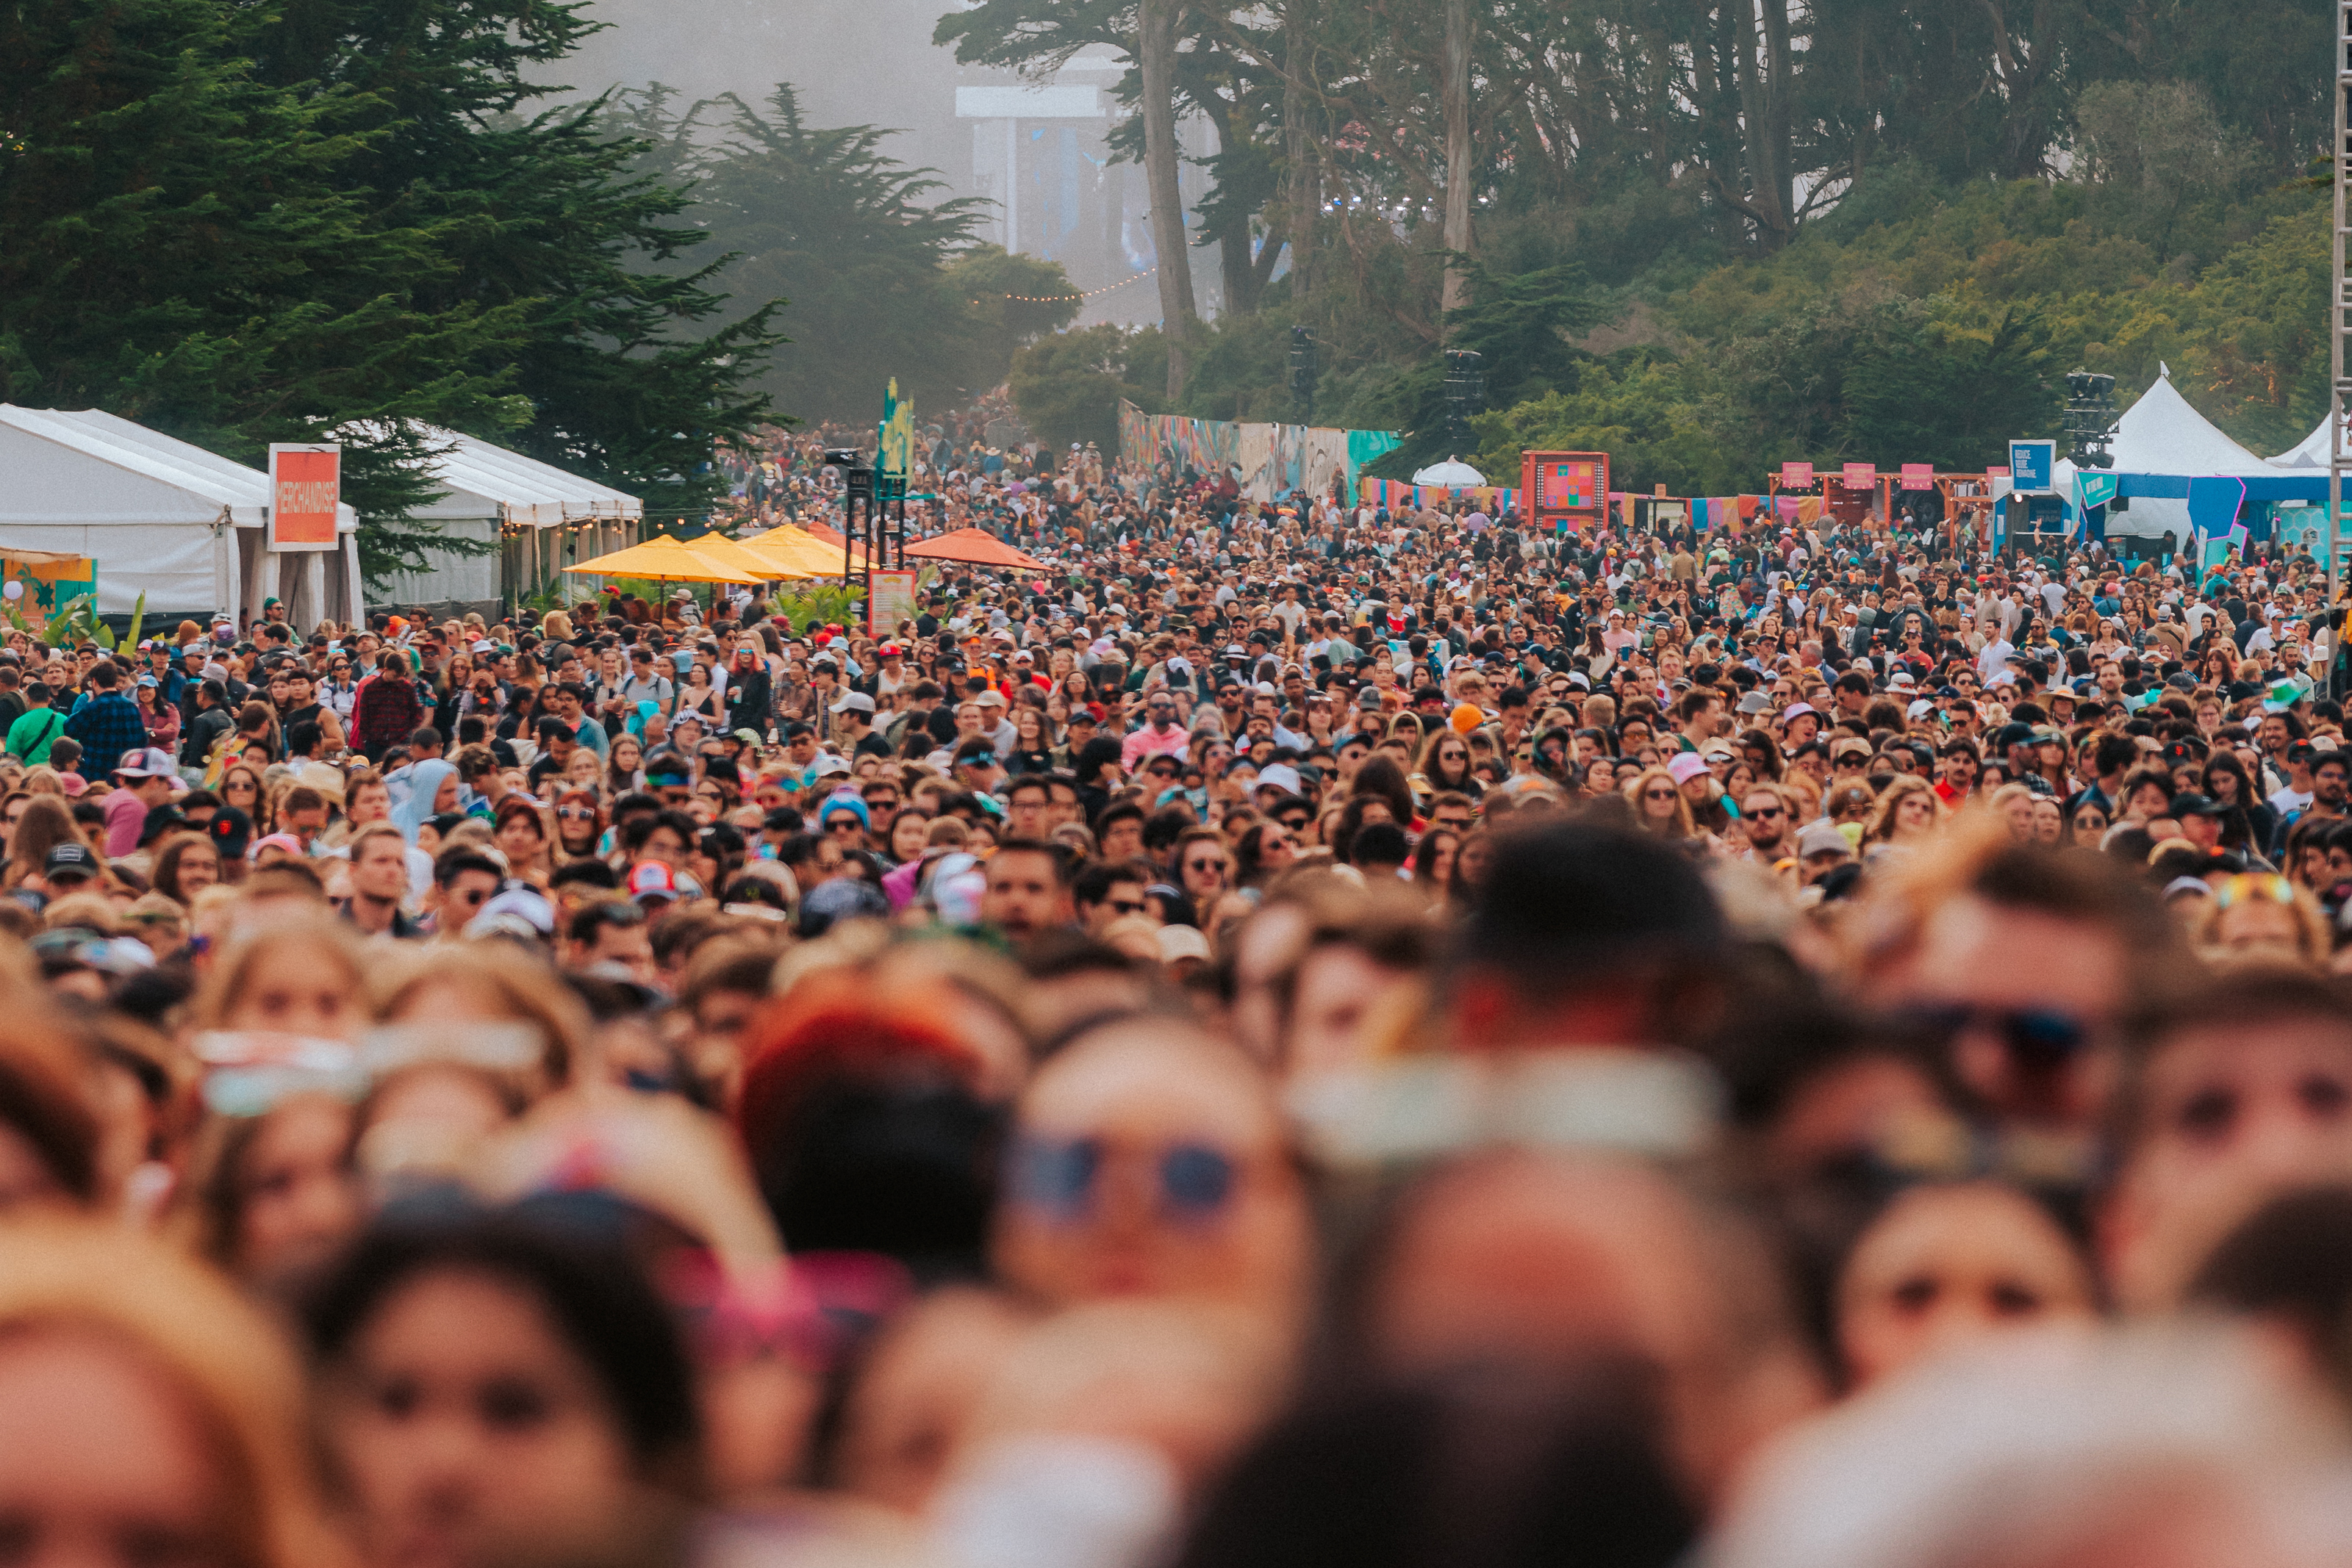 Is Crime at San Francisco’s Outside Lands on the Rise? A Look at the Numbers